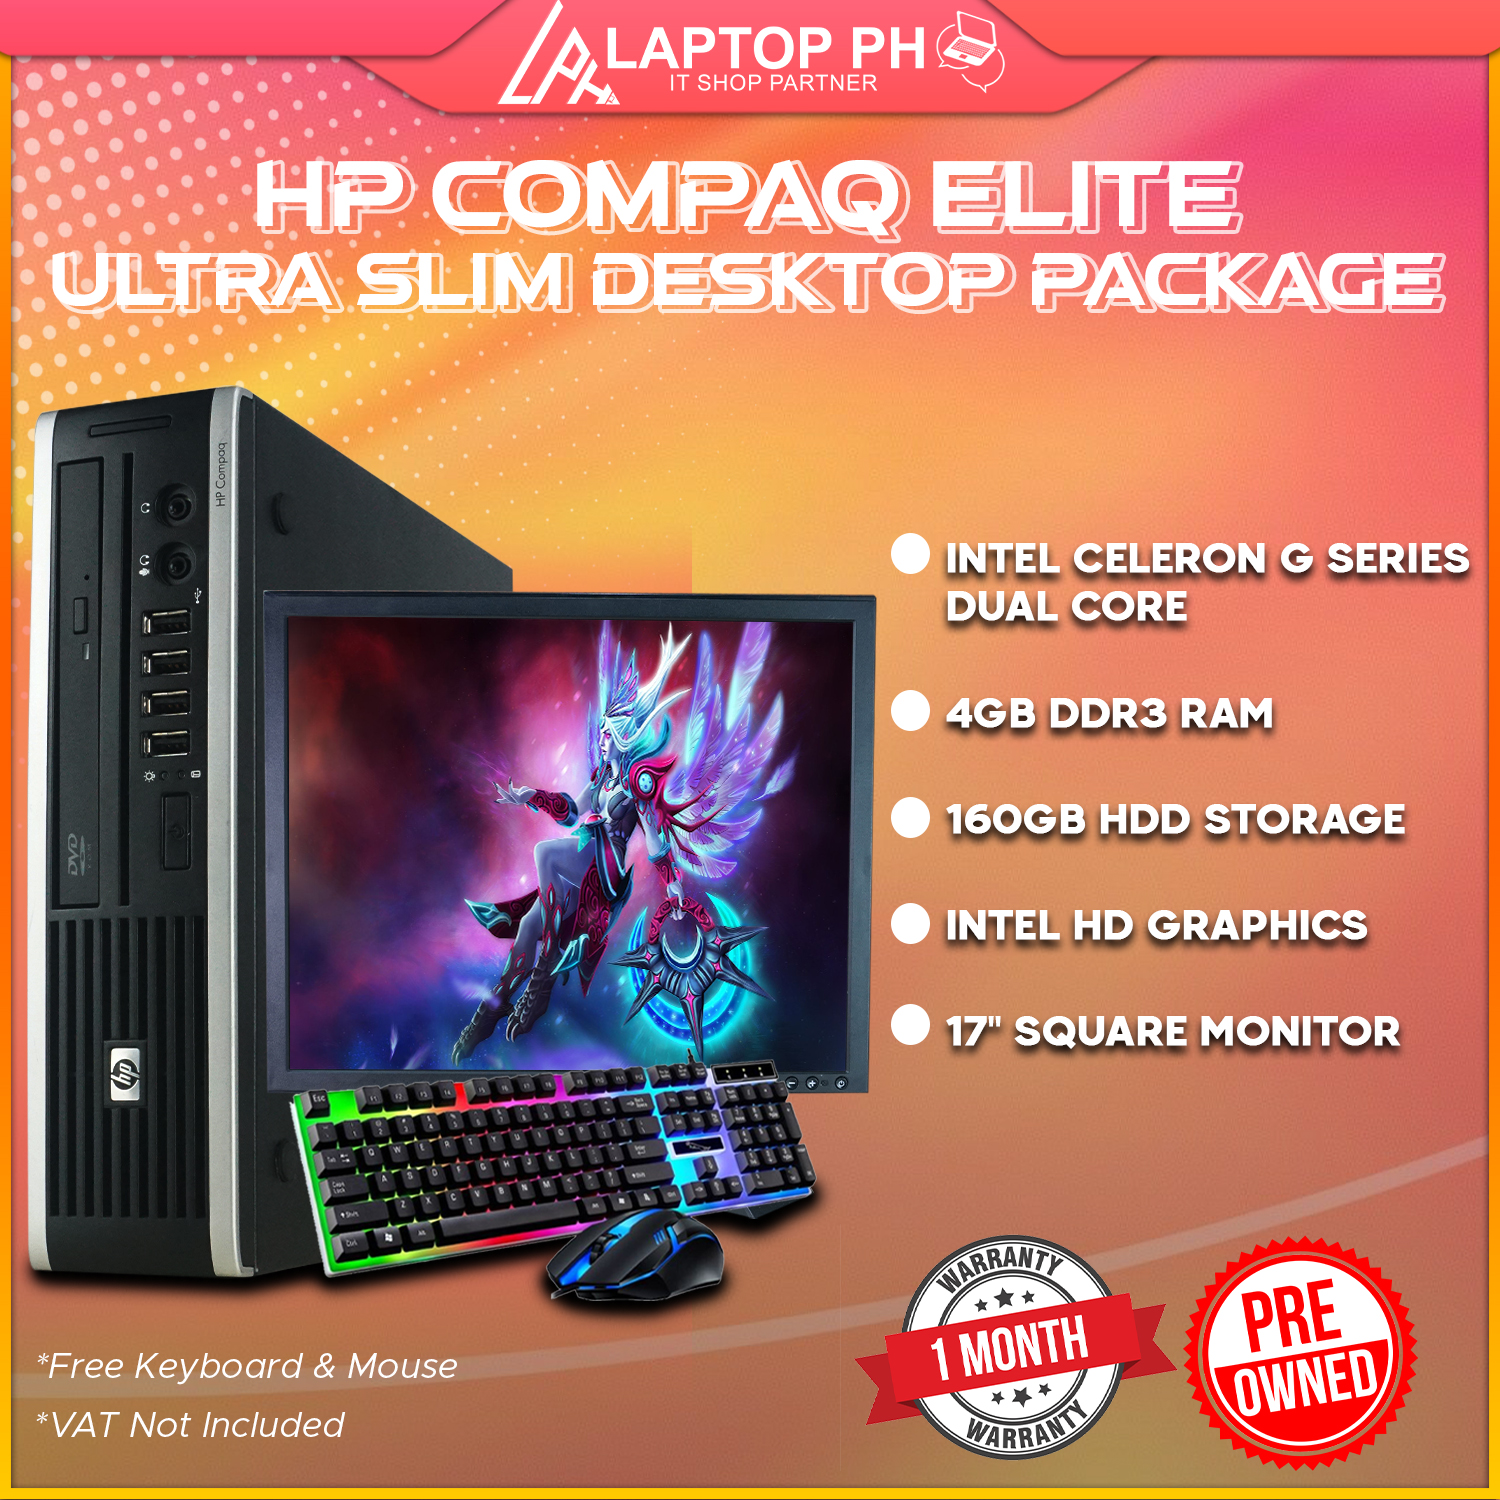 snow Creek pray HP COMPAQ ELITE DESKTOP PACKAGE | Intel Celeron G-Series Dual Core , 4GB  DDR3 Ram , 160GB HDD Storage , Intel HD Graphics | We also have All in one  pc ,